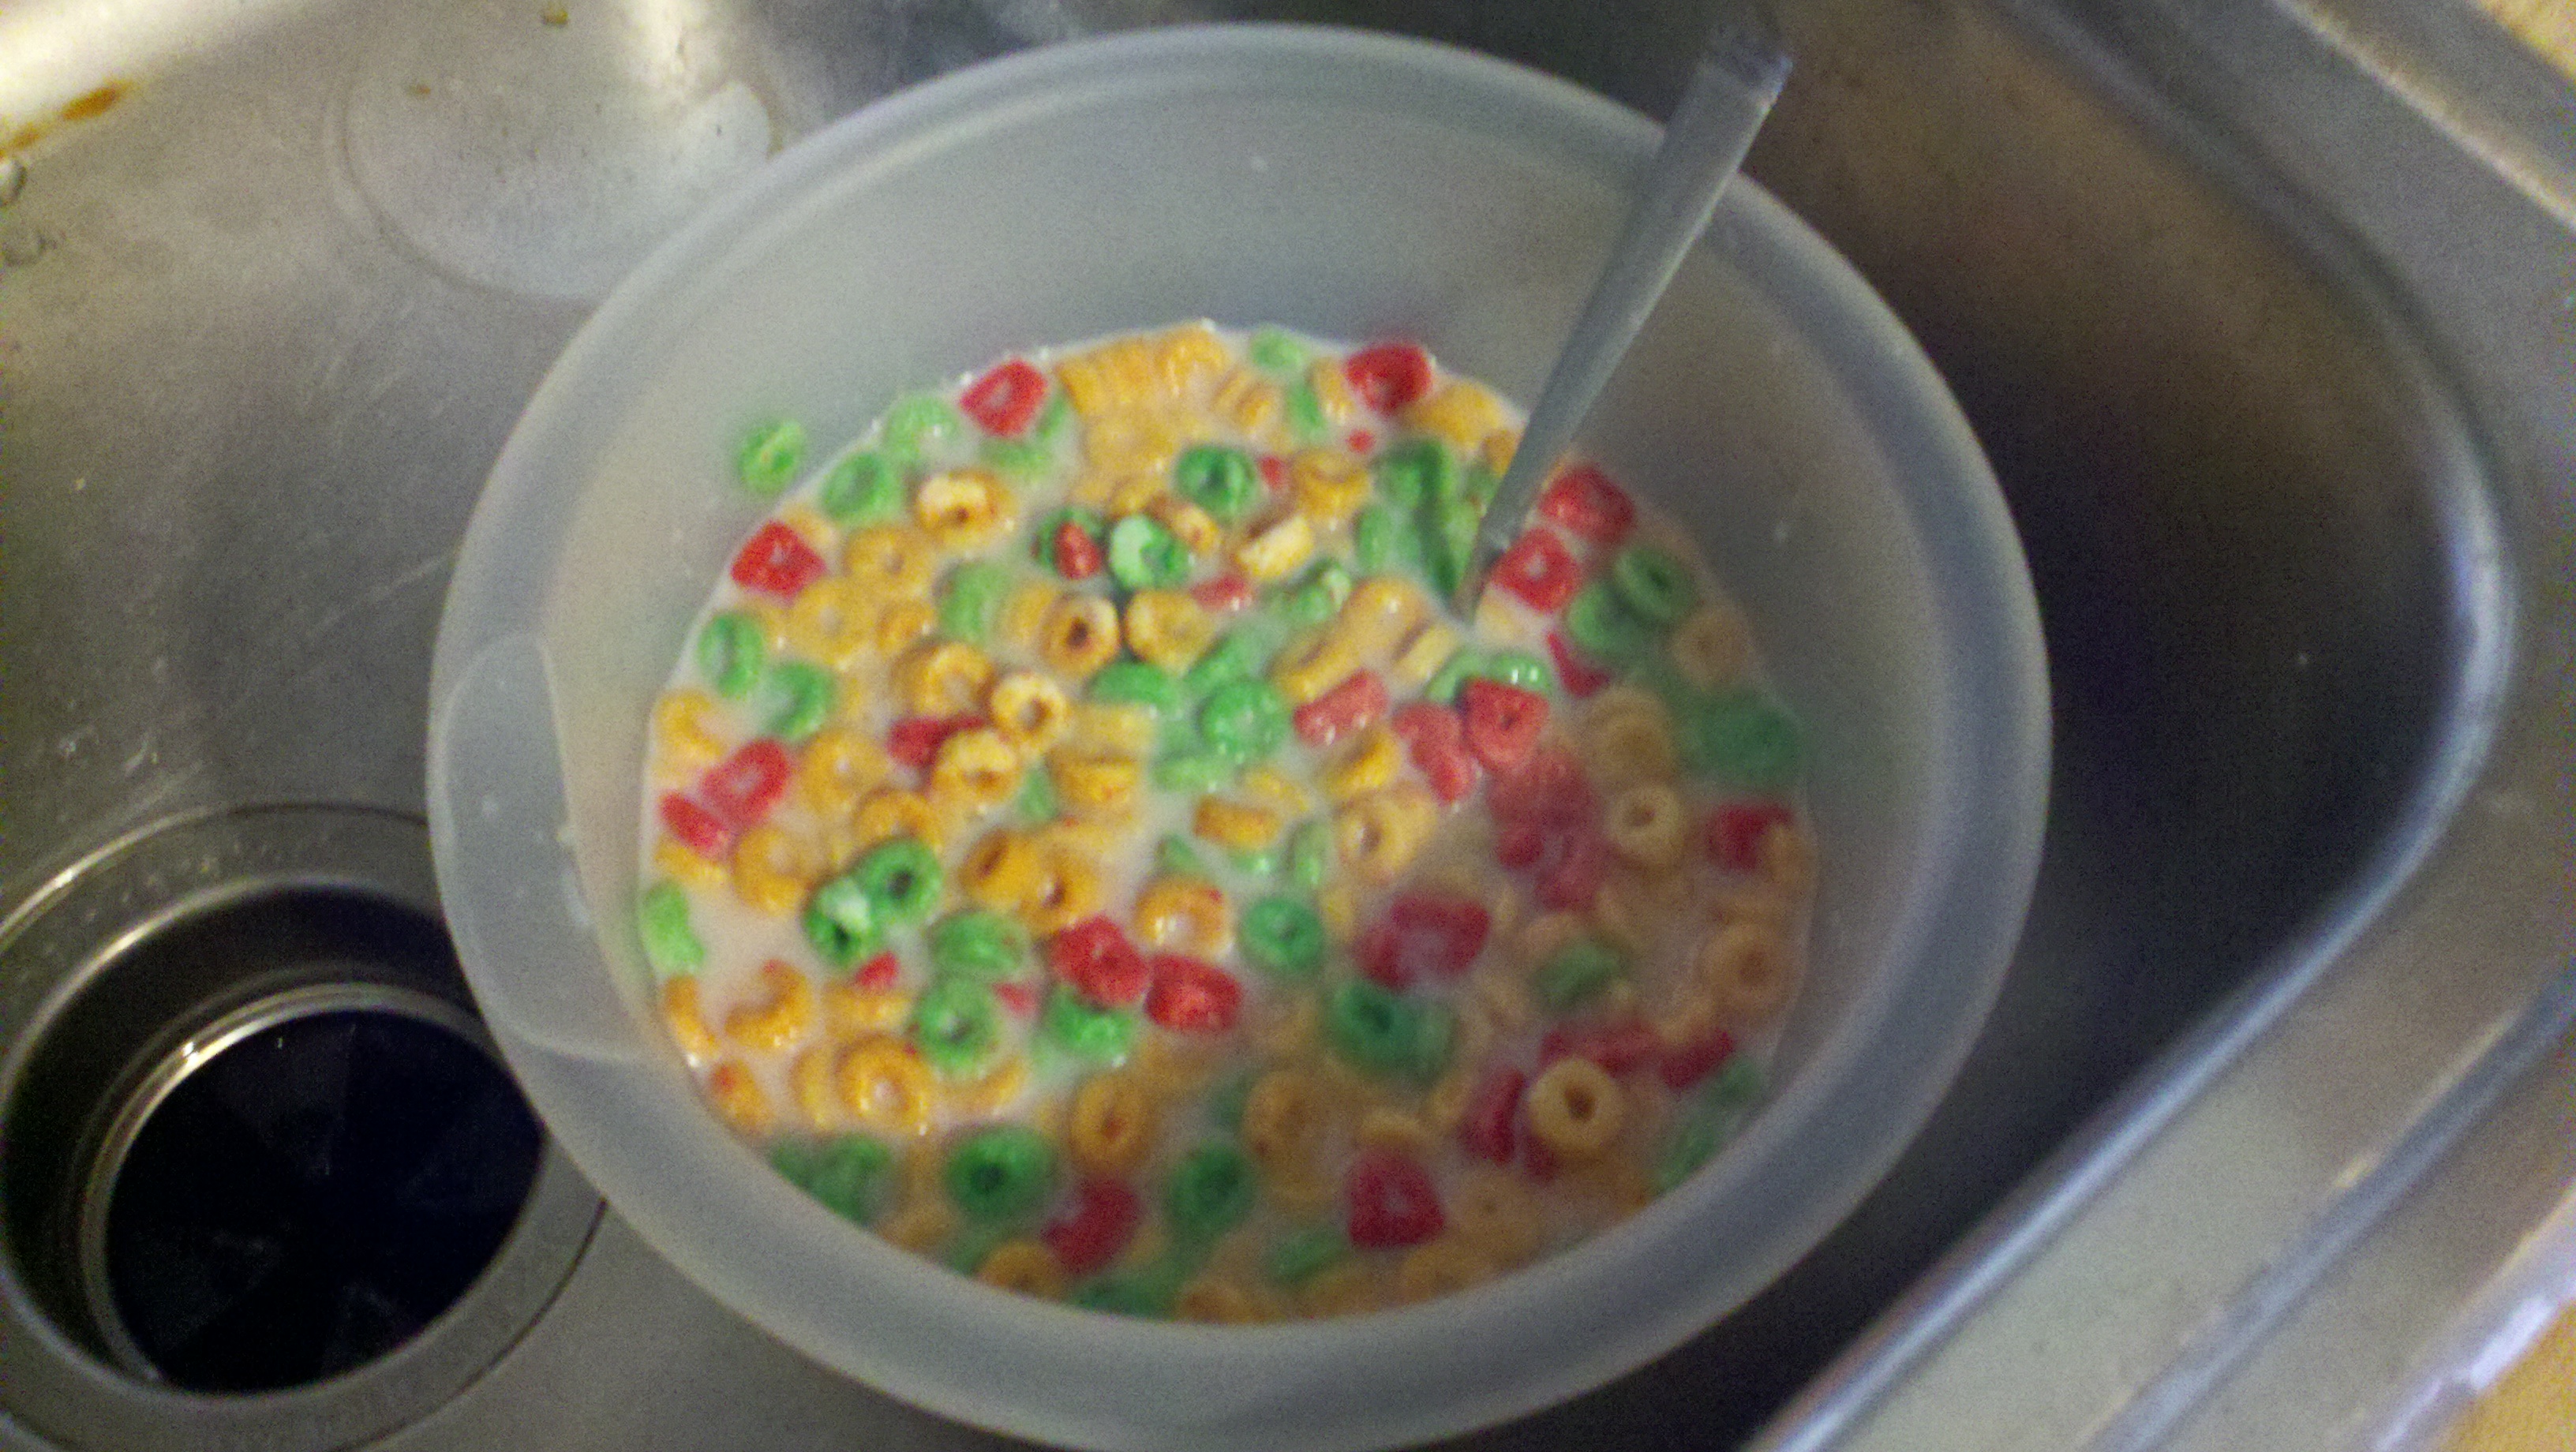 devon quick share froot loops in ass photos